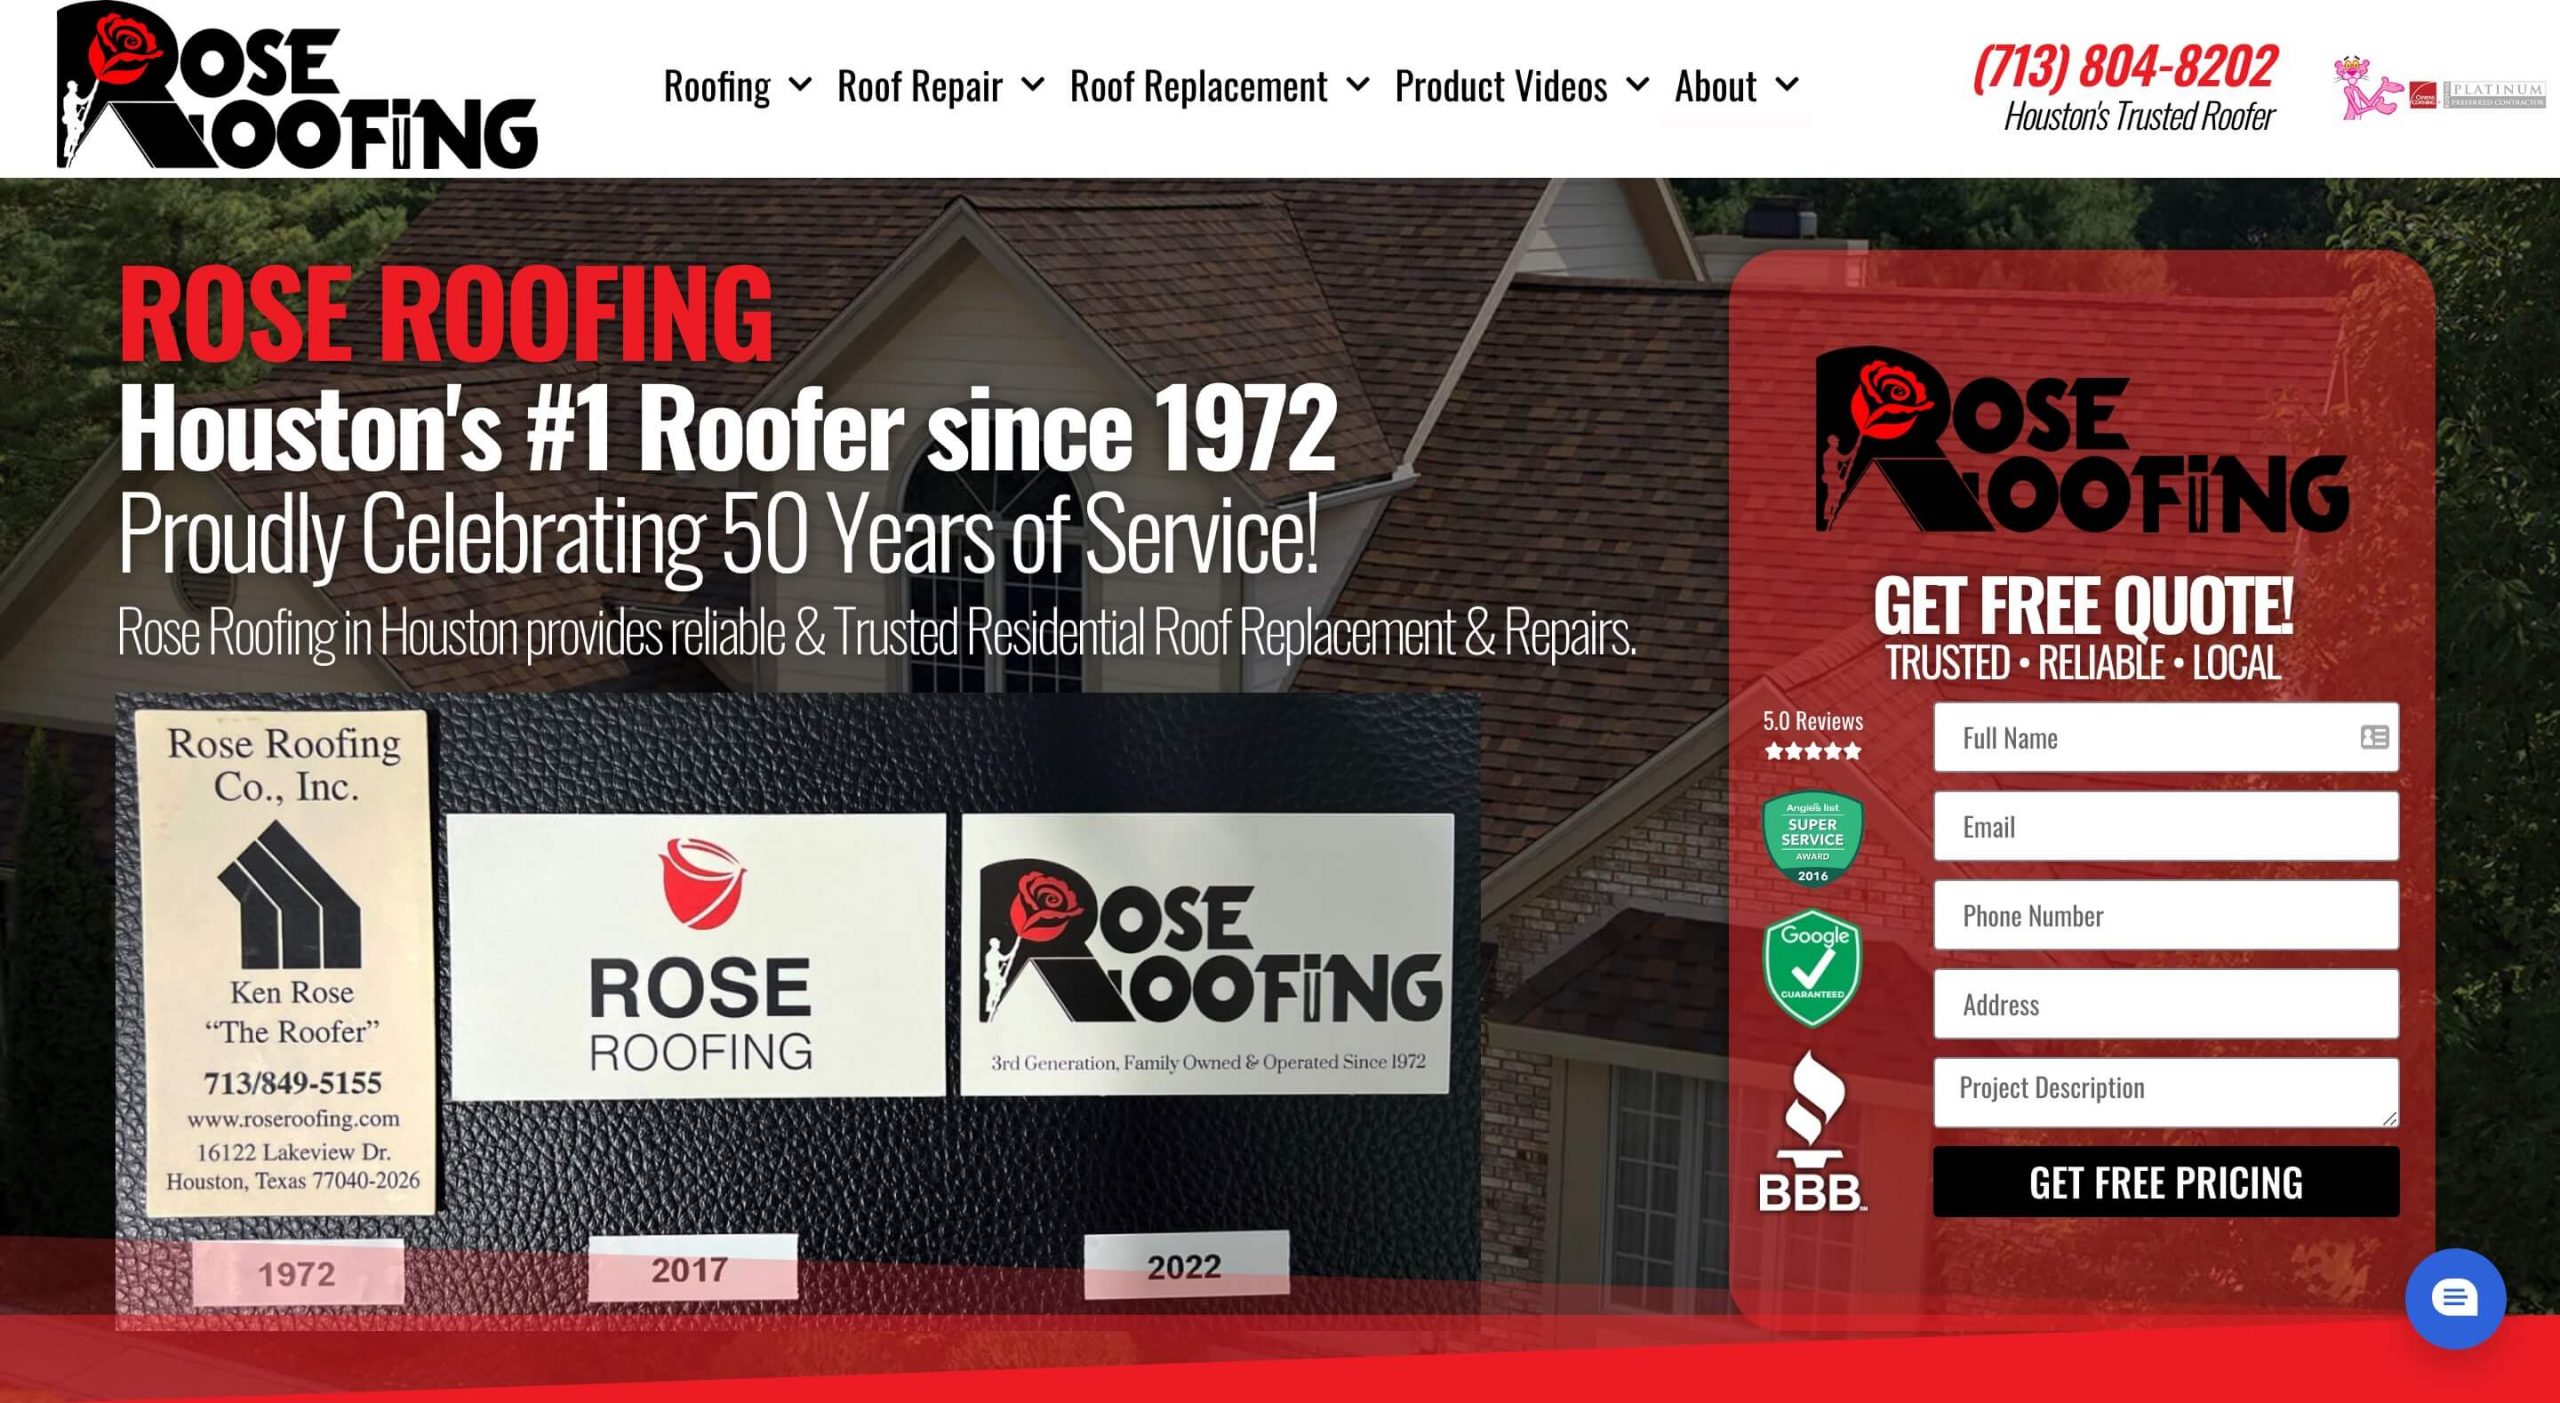 A roofing website in Houston, TX